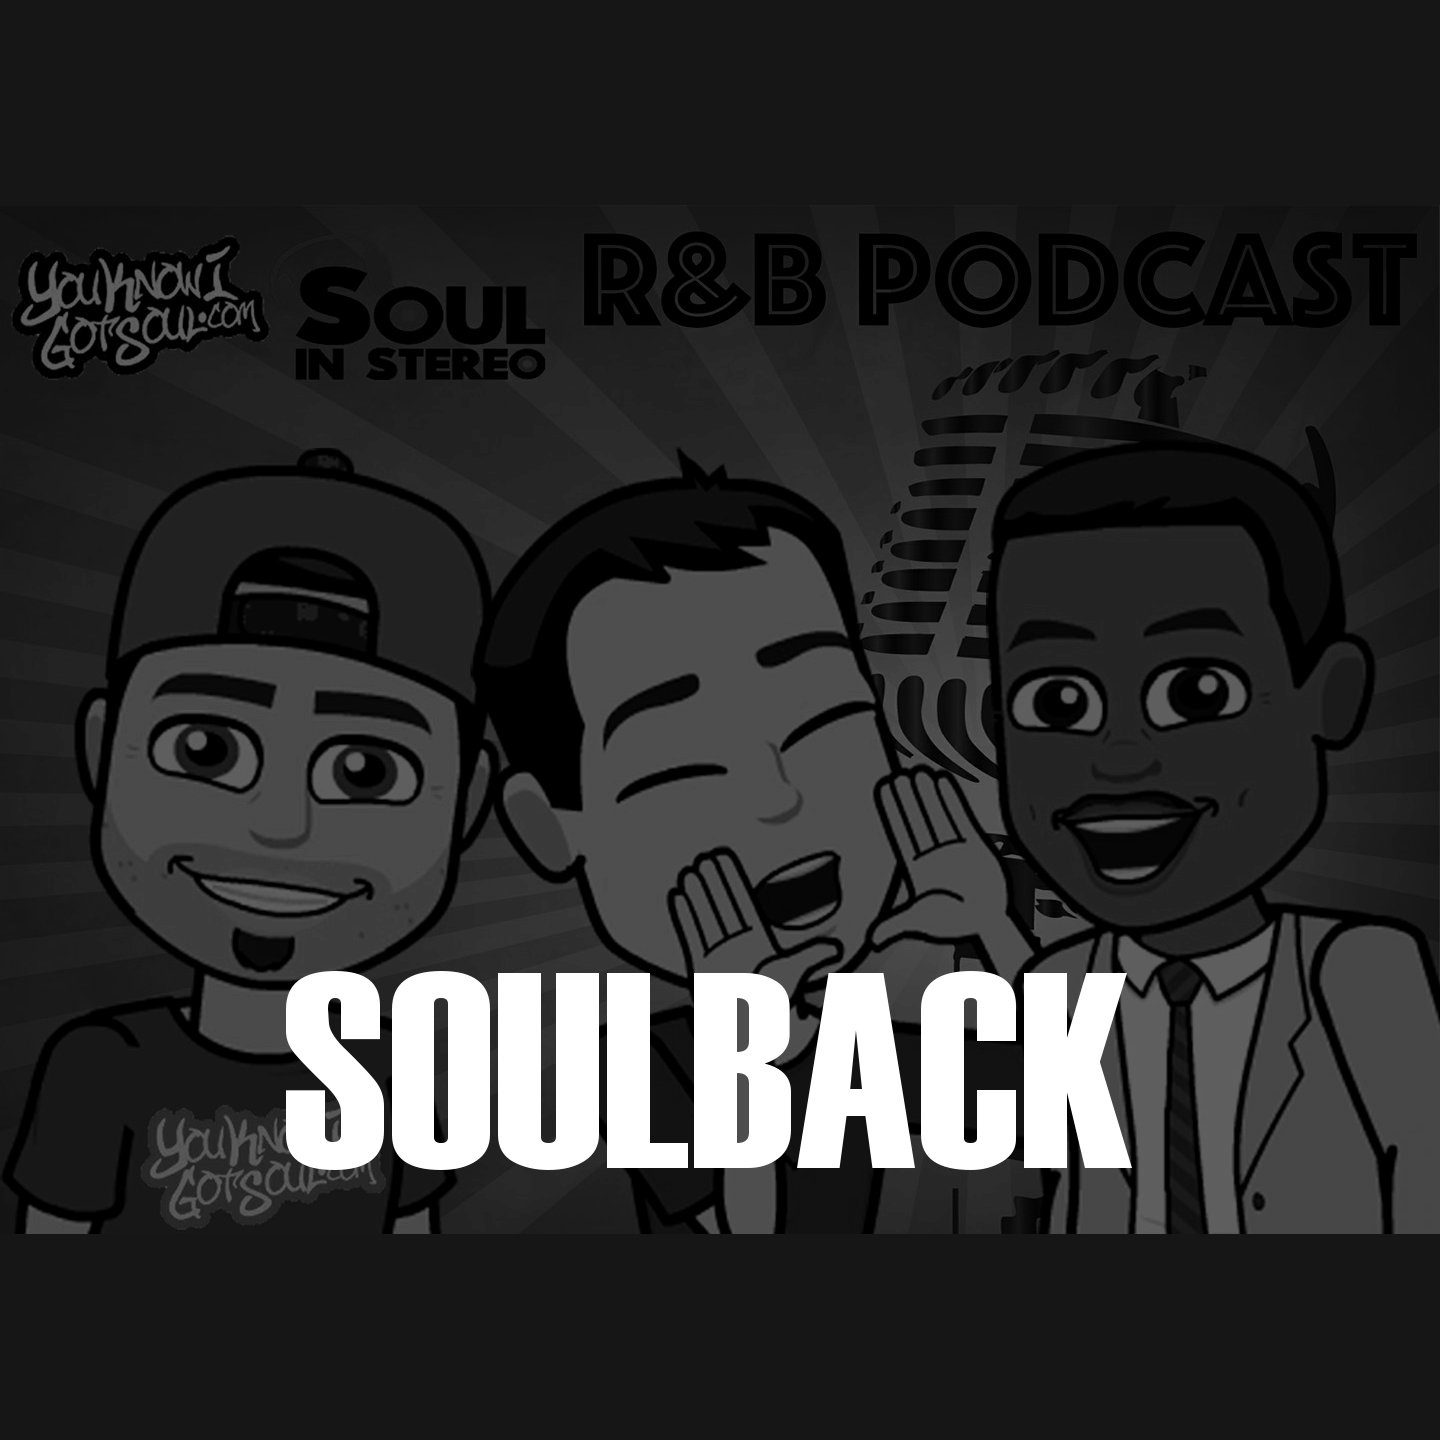 SoulBack (featuring Meelah of 702) – The R&B Podcast Episode 11